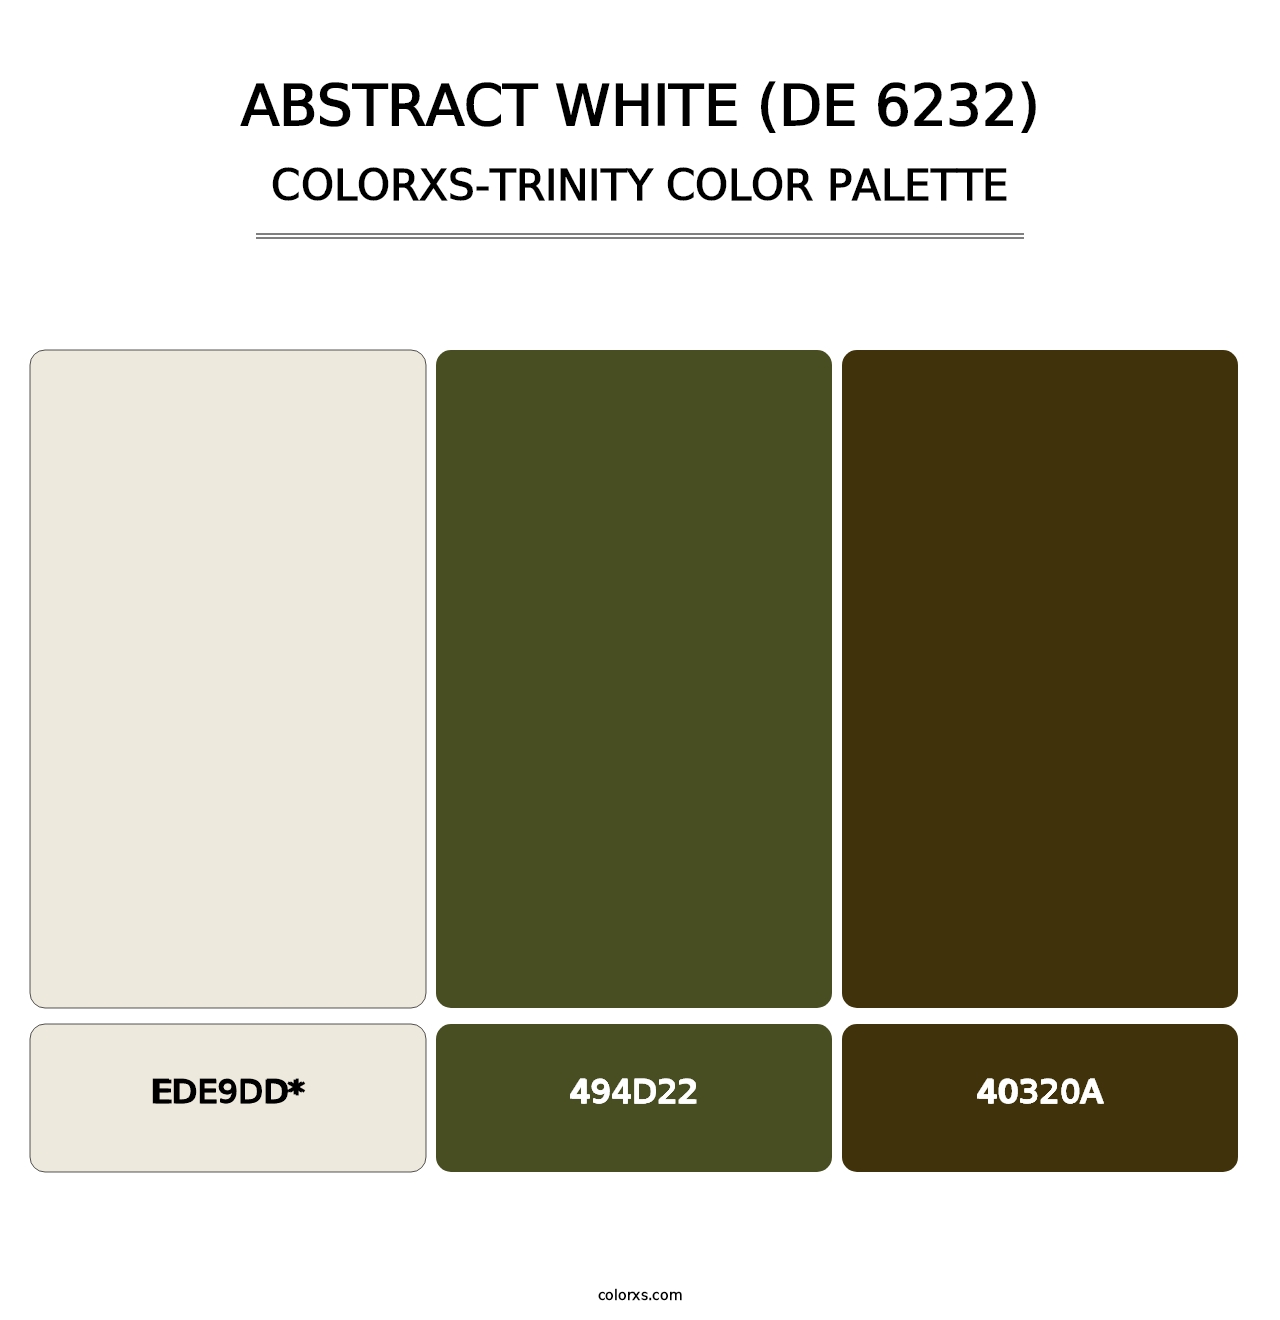 Abstract White (DE 6232) - Colorxs Trinity Palette